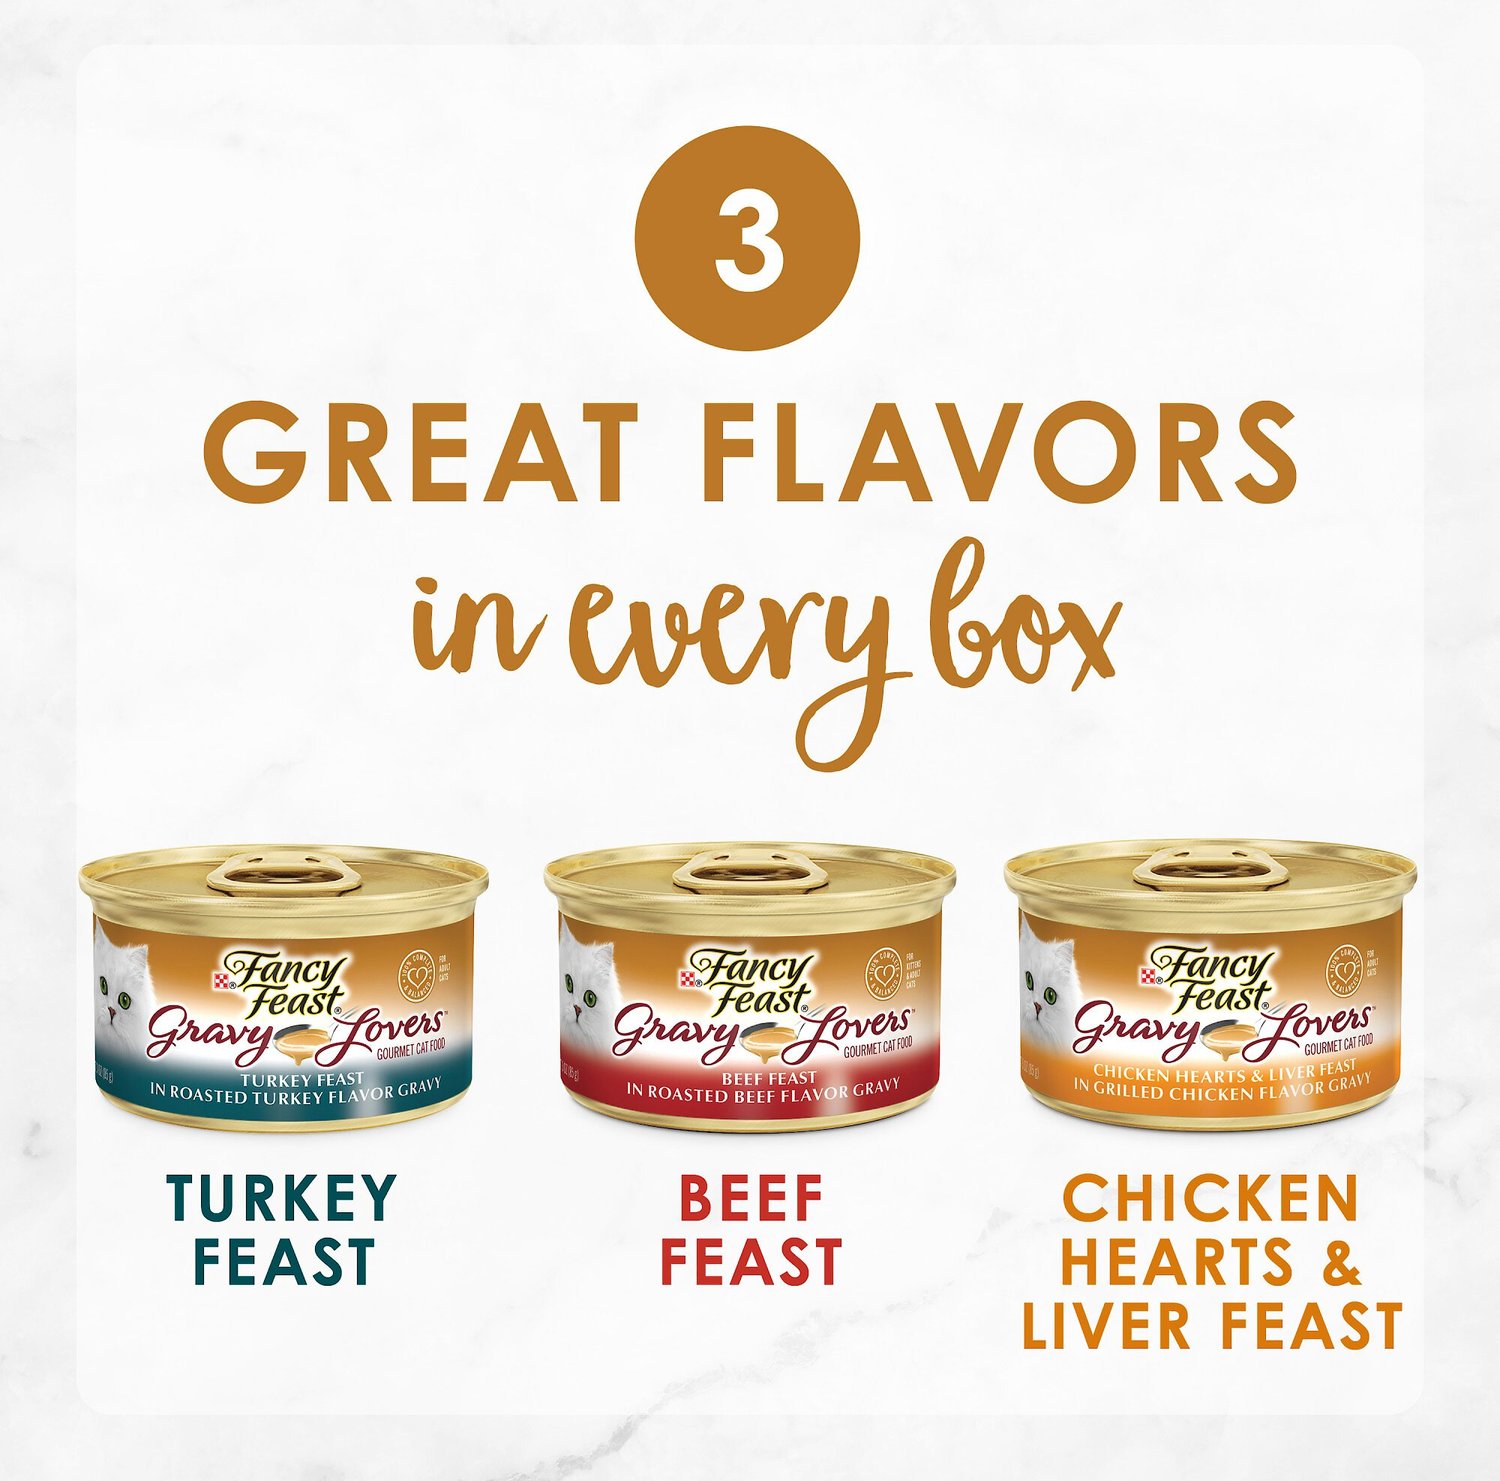 Fancy Feast Gravy Lovers Poultry & Beef Variety Pack Canned Cat Food